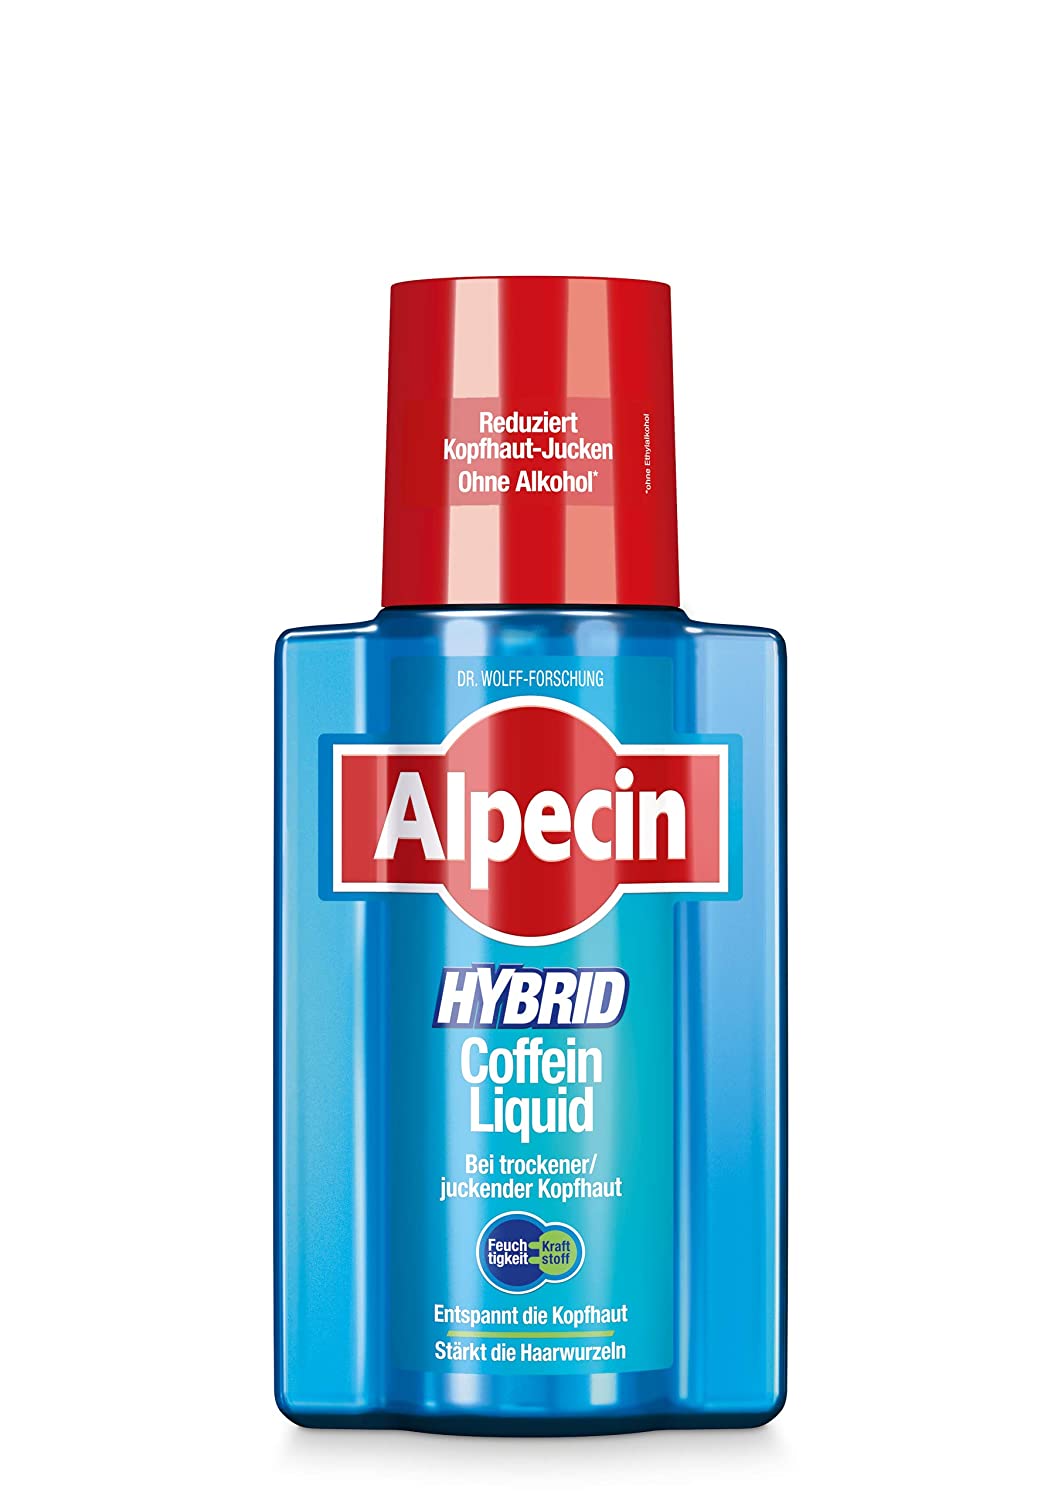 Alpecin Hybrid Caffeine Liquid, 1 x 200 ml for Dry or Itchy Scalp, Alcohol-free, Prevents Hereditary Hair Loss, Soothes the Scalp